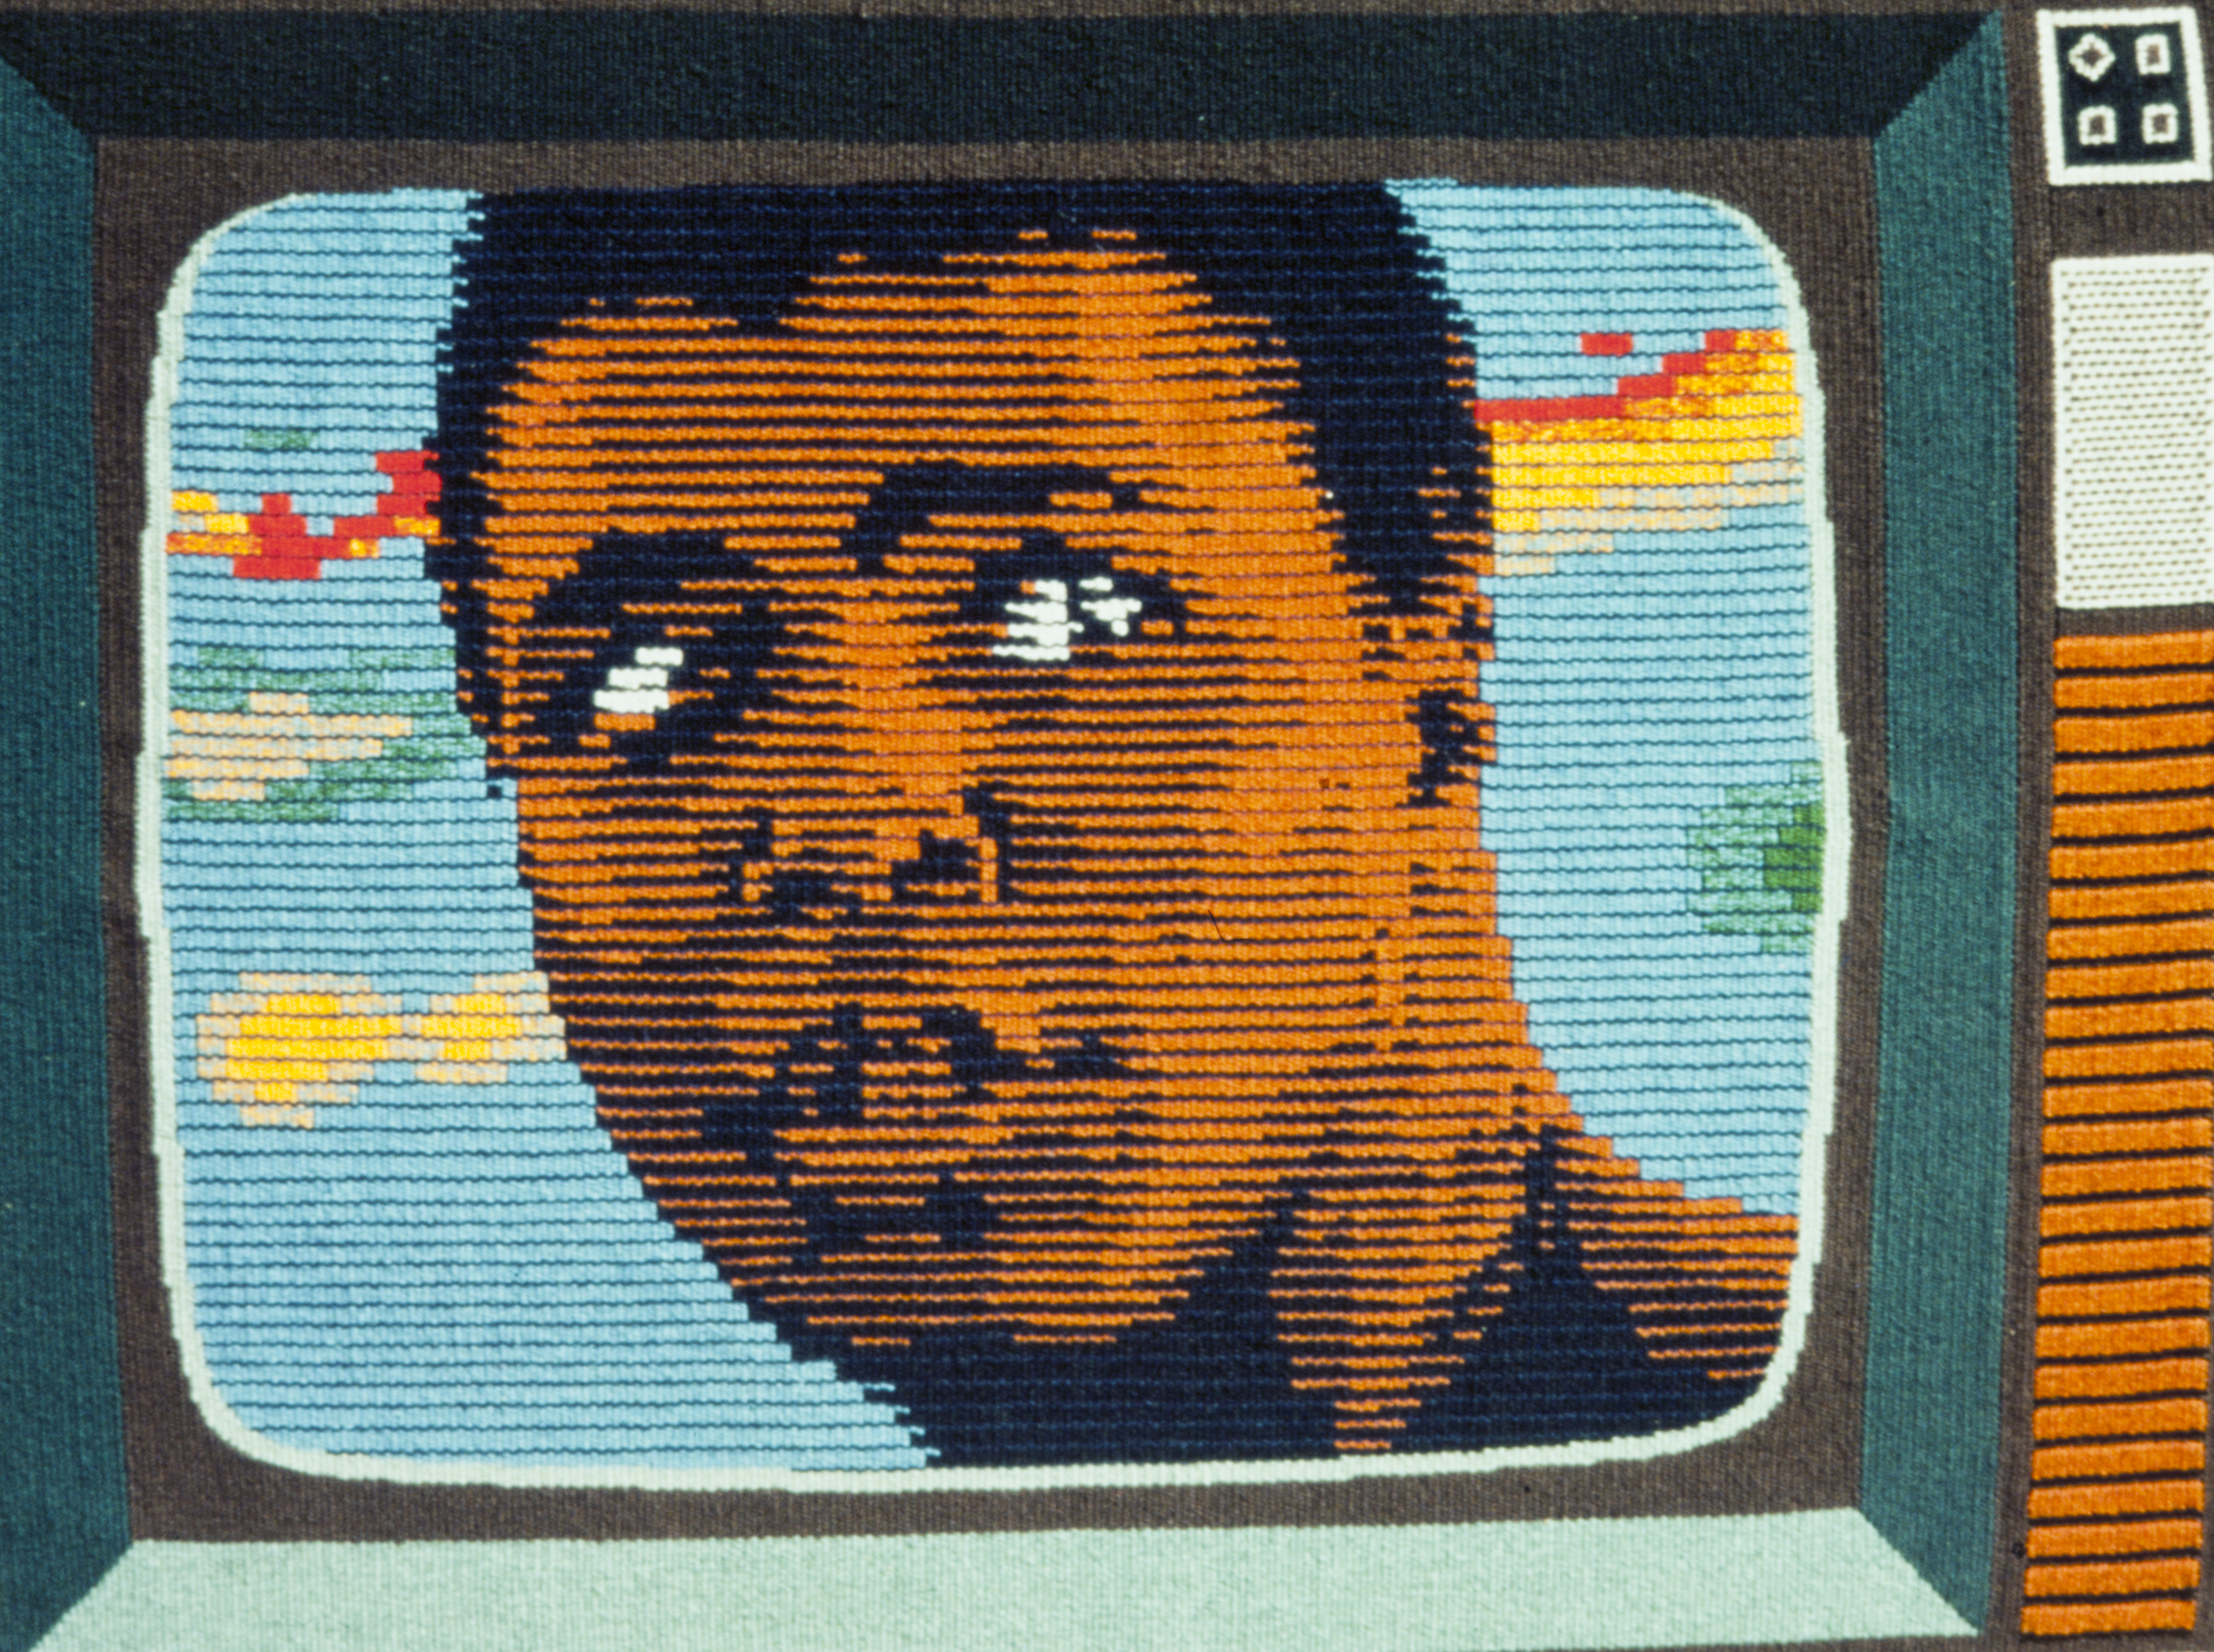 Iconic tapestry of Muhammad Ali by Archie Brennan